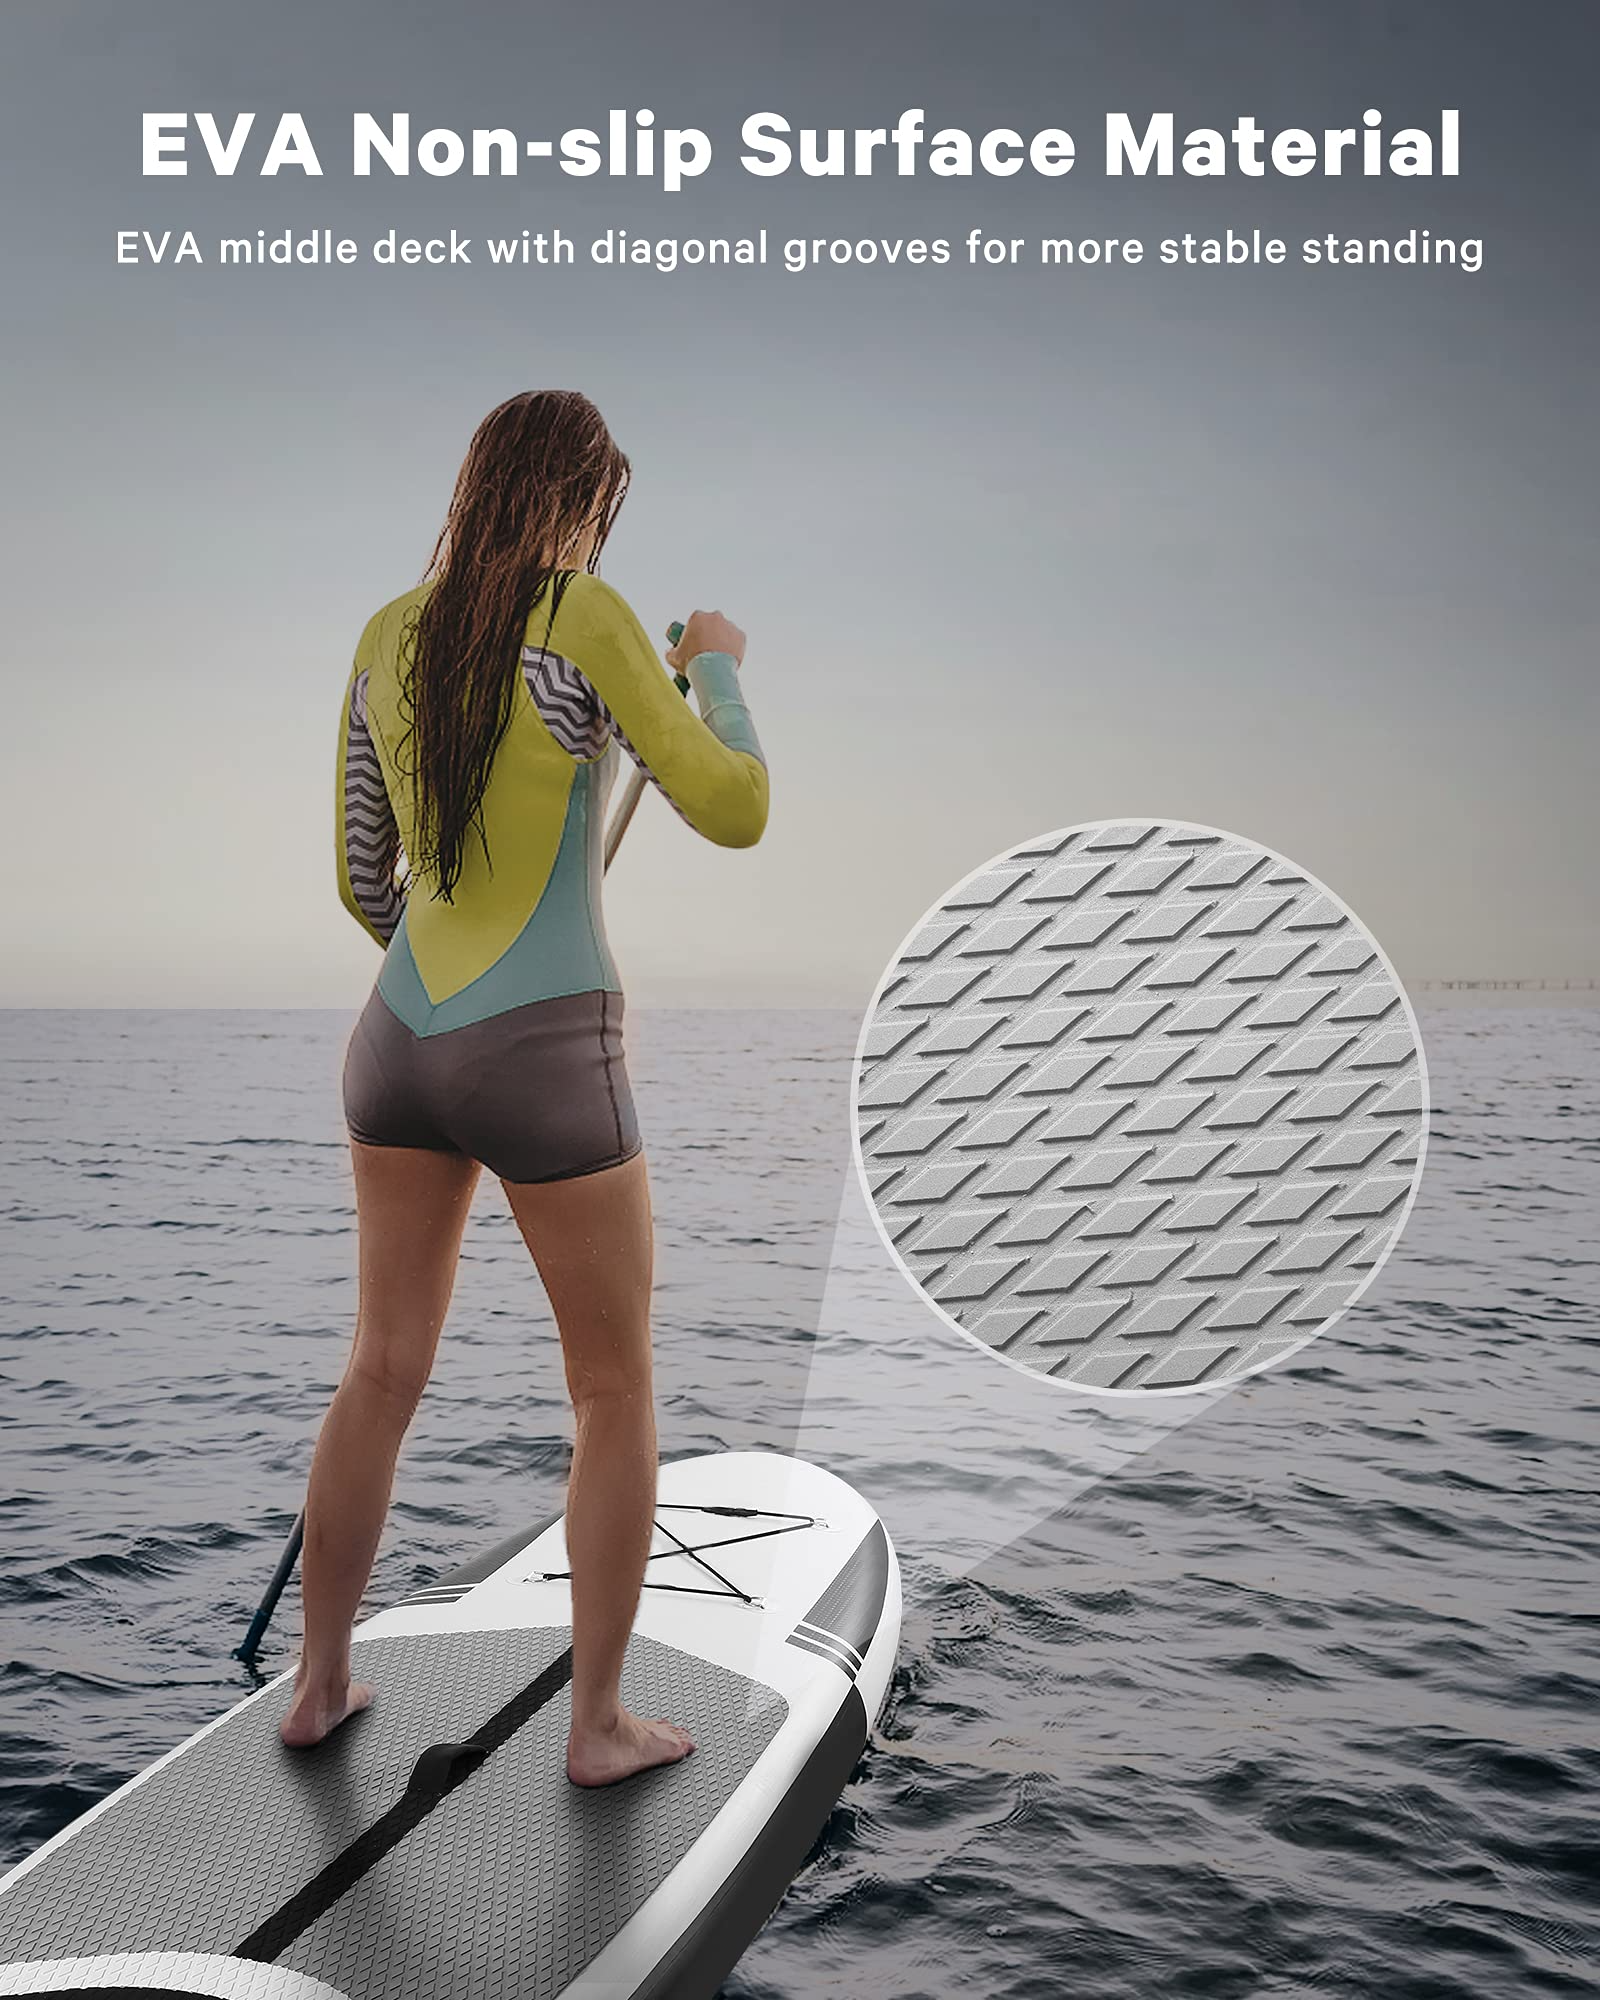 Maxkare 10Ft Inflatable Stand SUP Up Adult, for – Paddle 330 MAXKARE Youth Board